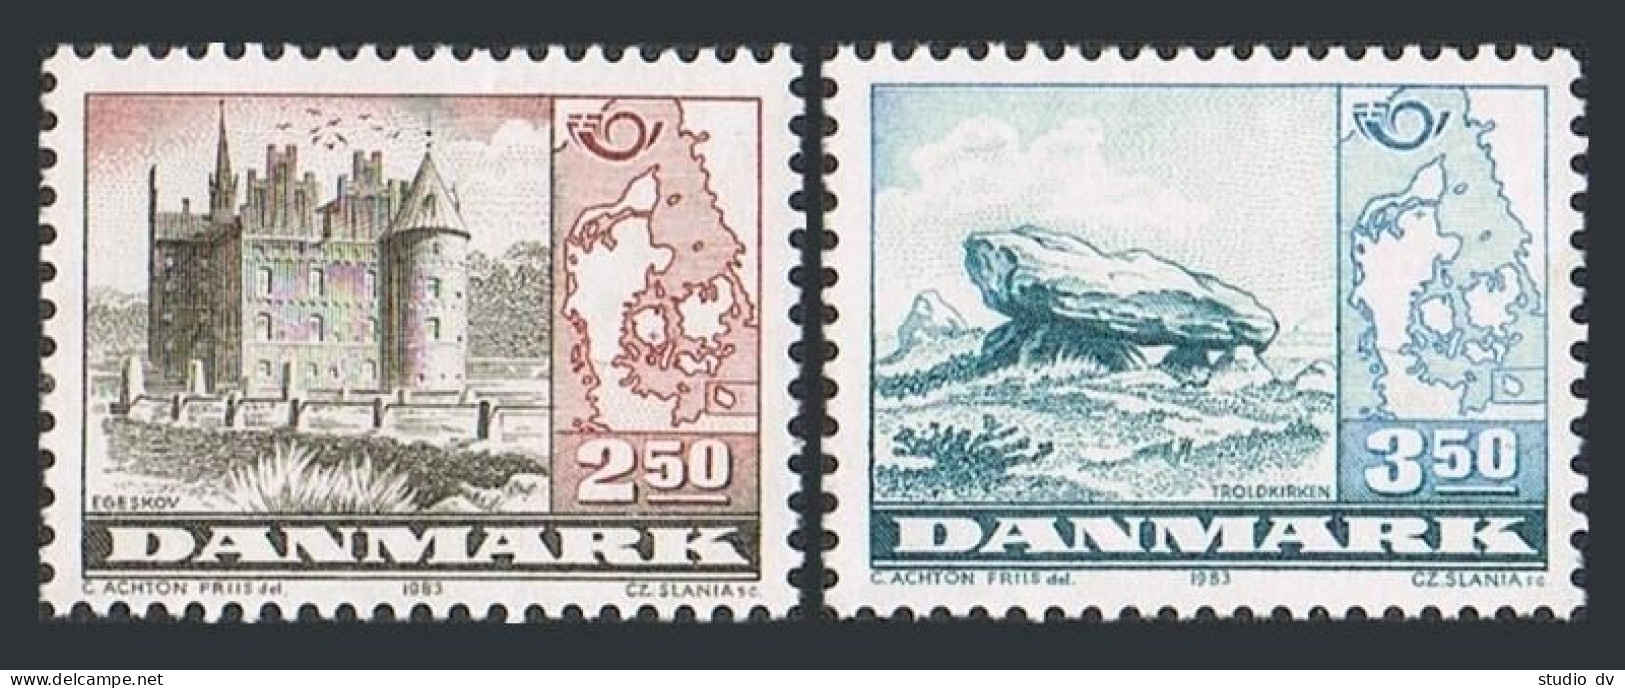 Denmark 735-736,MNH.Michel 772-773. Nordic Cooperation 1983.Castle.Troll Church, - Unused Stamps